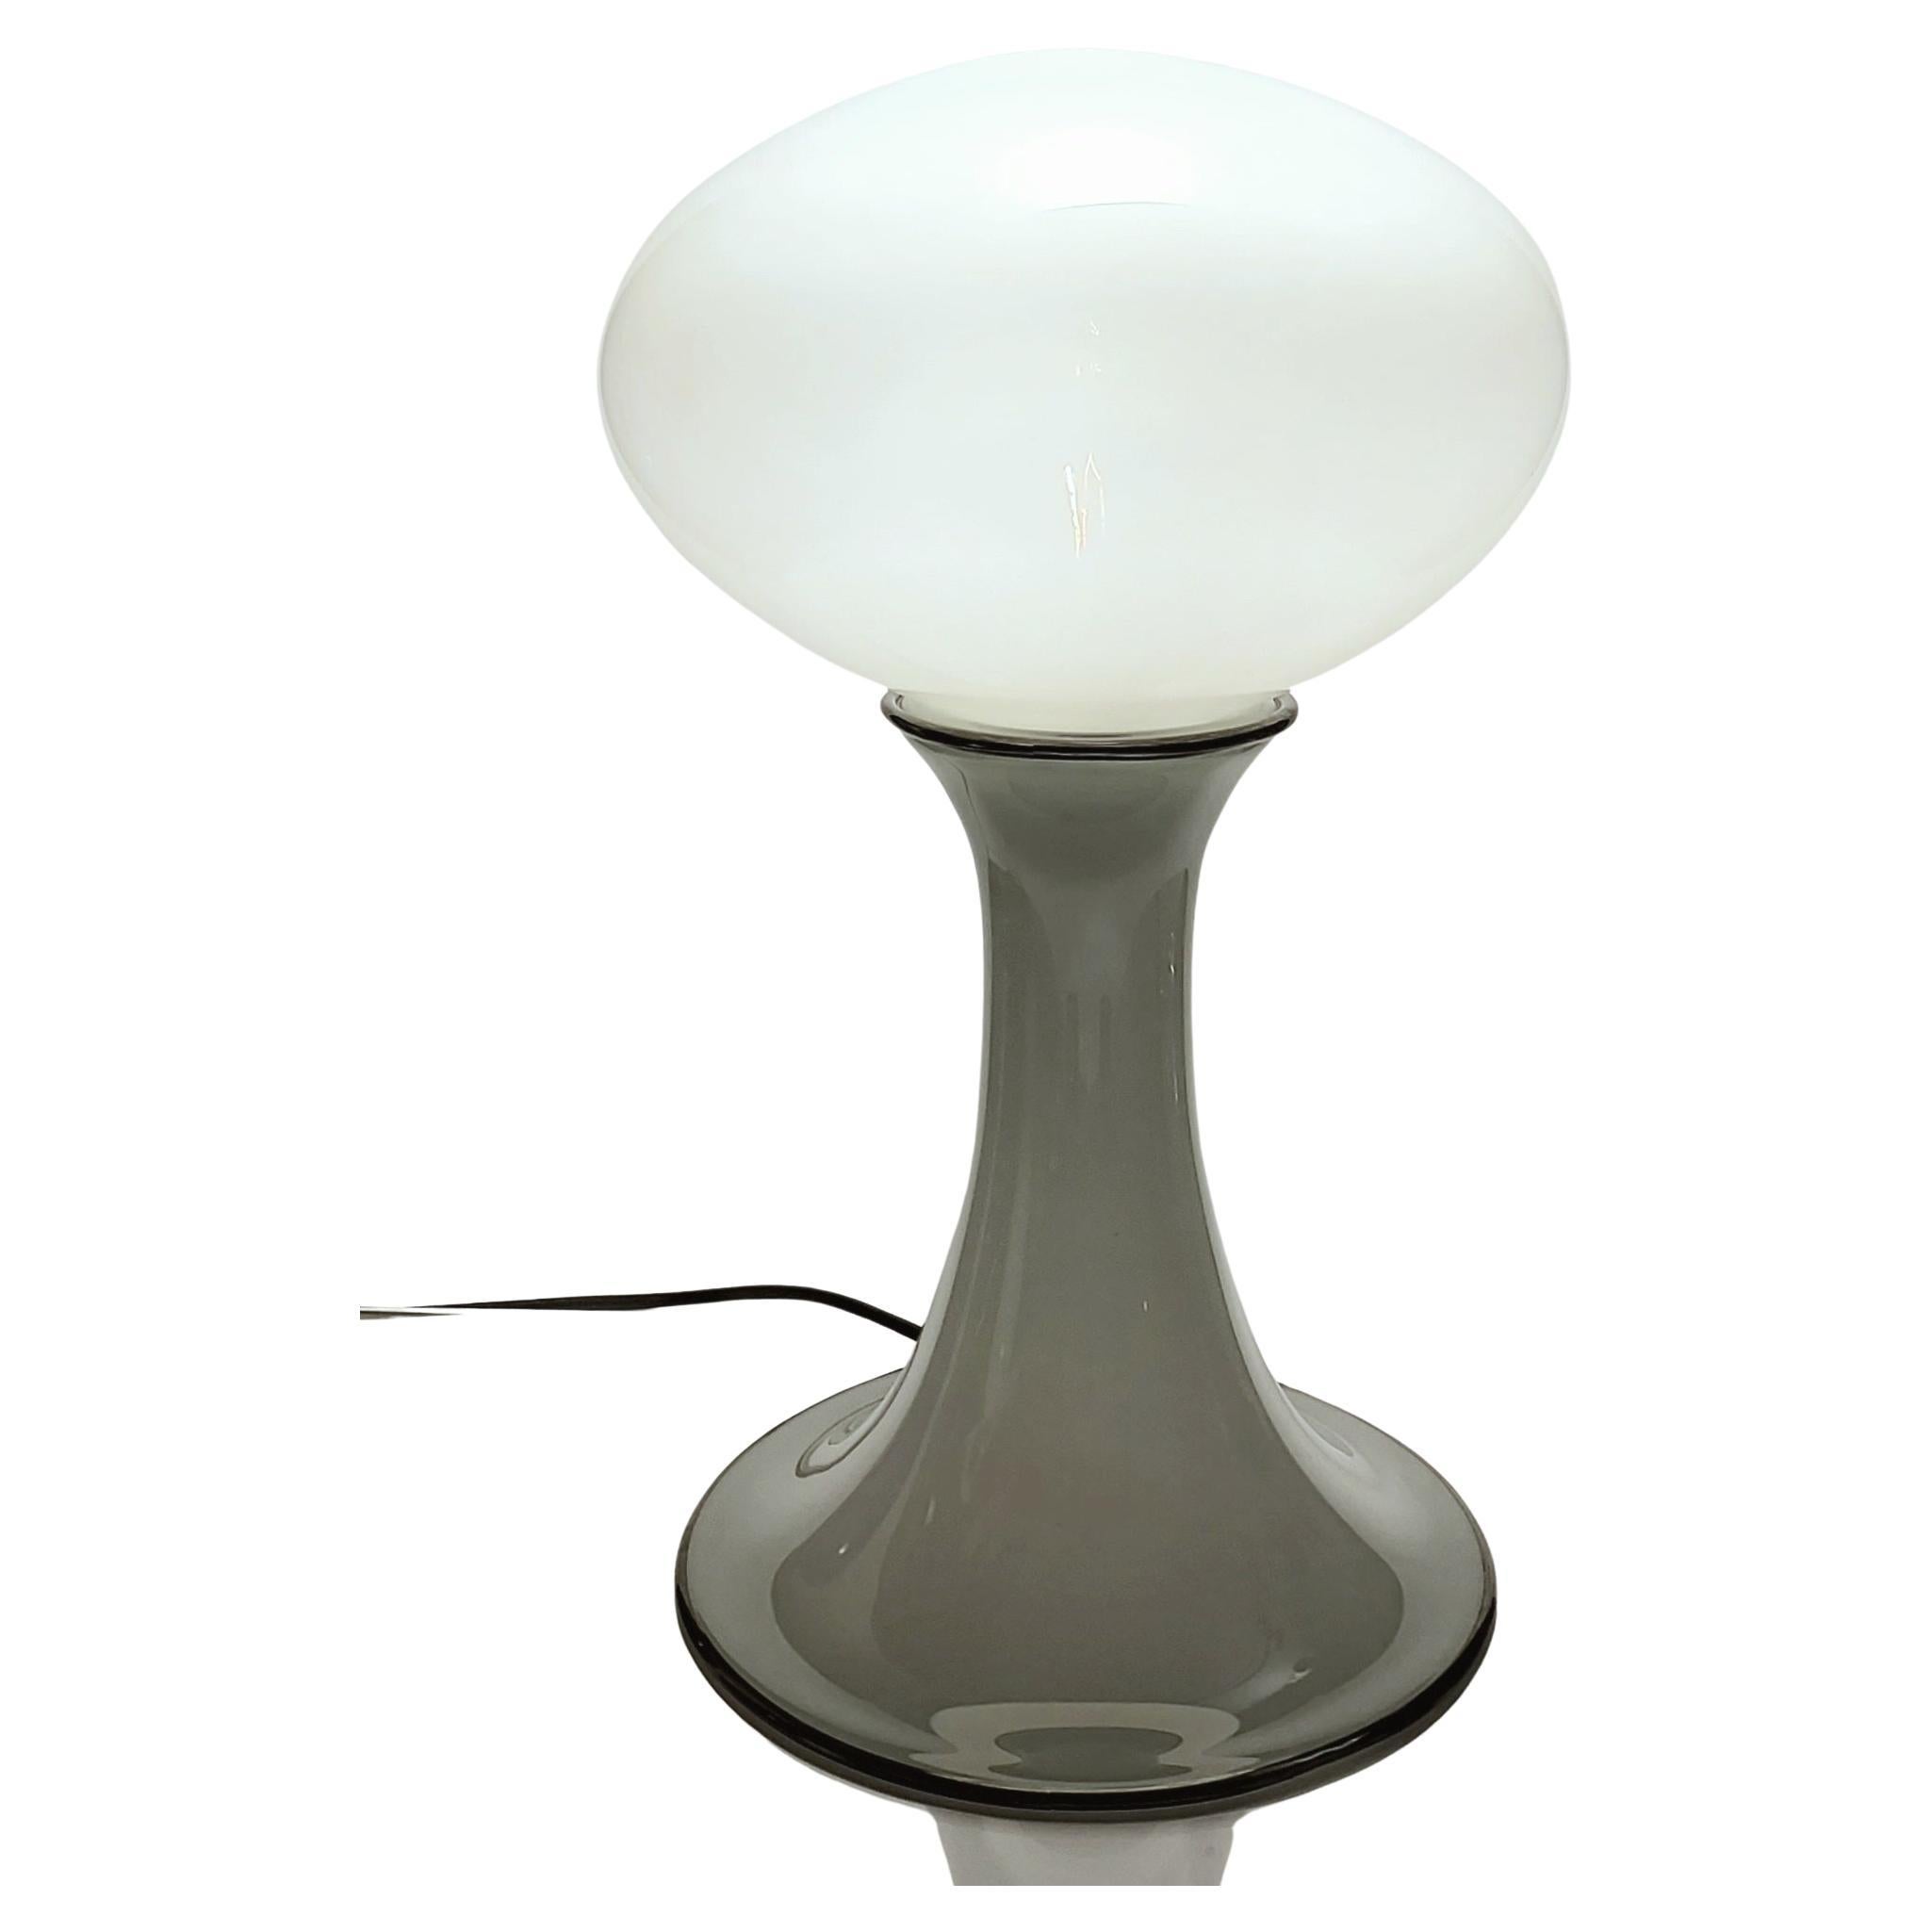 Futura Table Lamps, Handmade Contemporary Luxury Glass Lighting For Sale